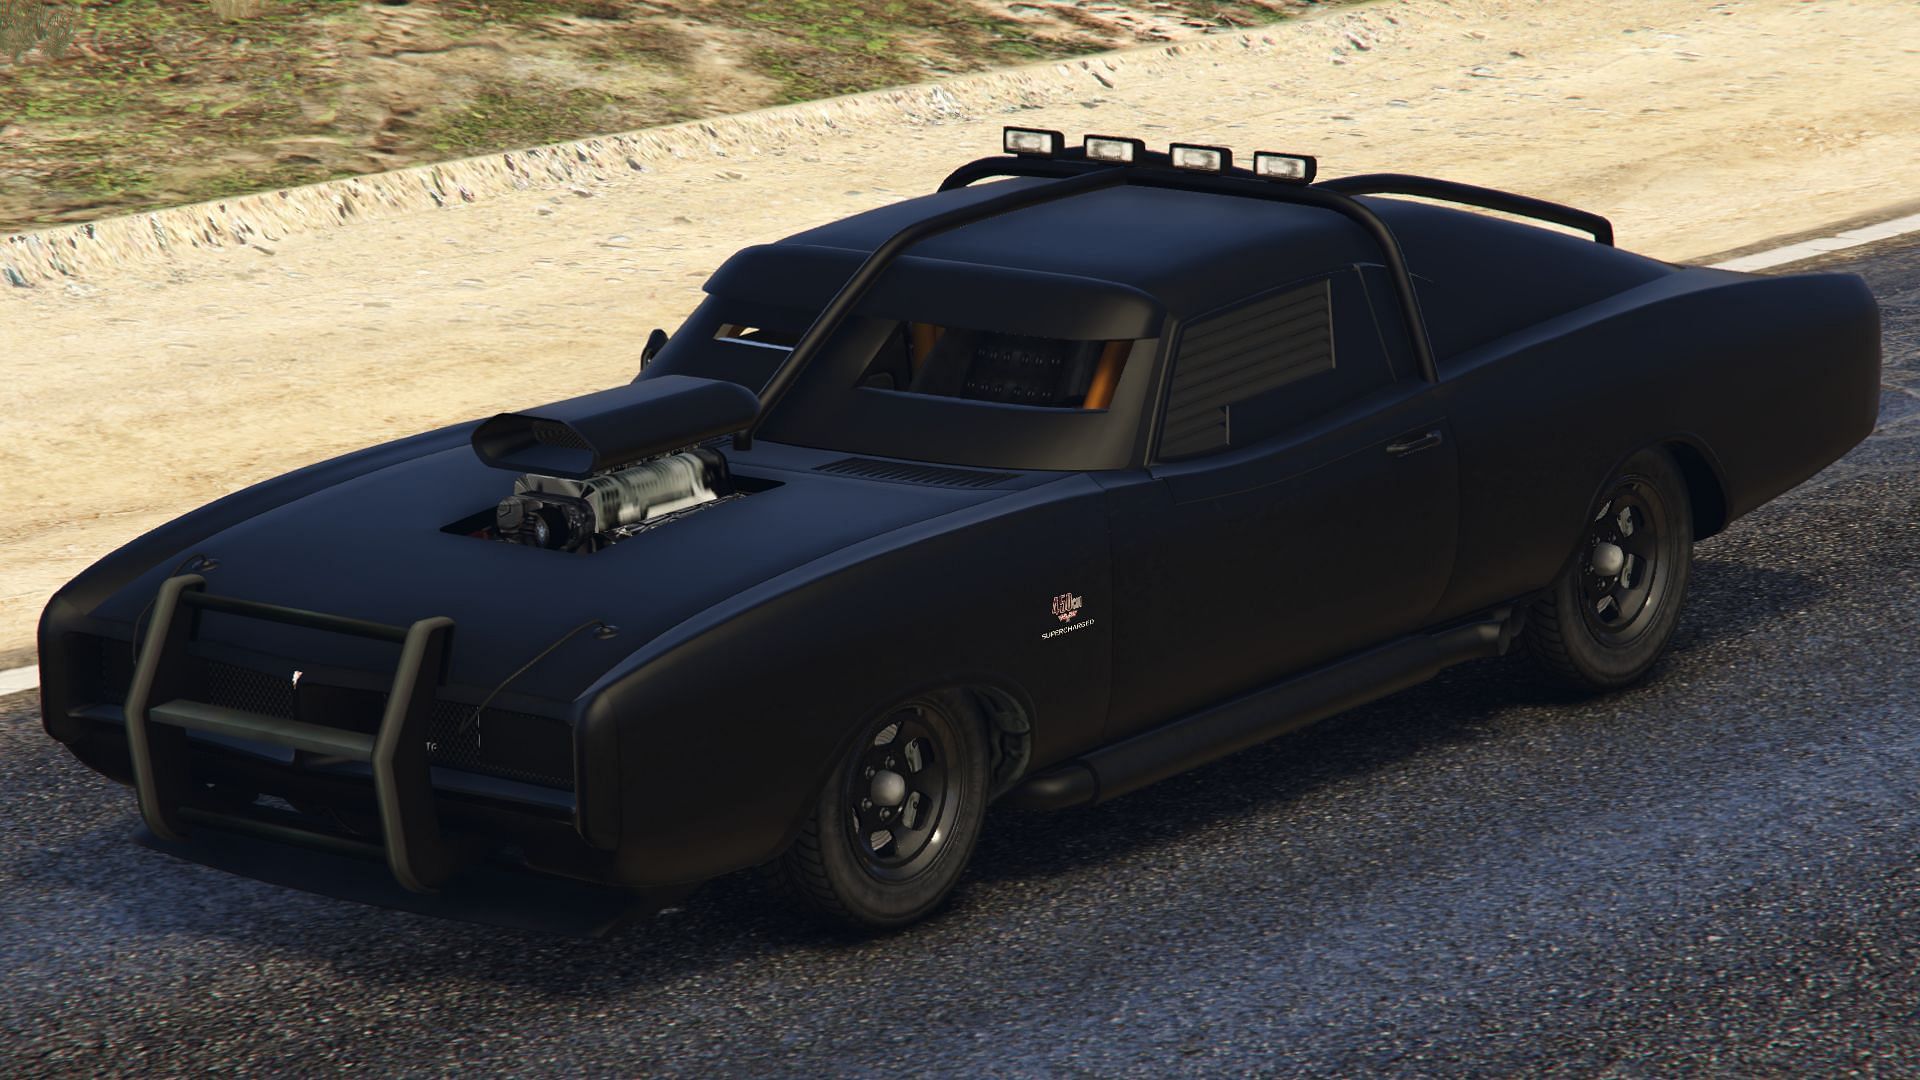 GTA Online players will find this vehicle to be exceptionally valuable (Image via Rockstar Games)